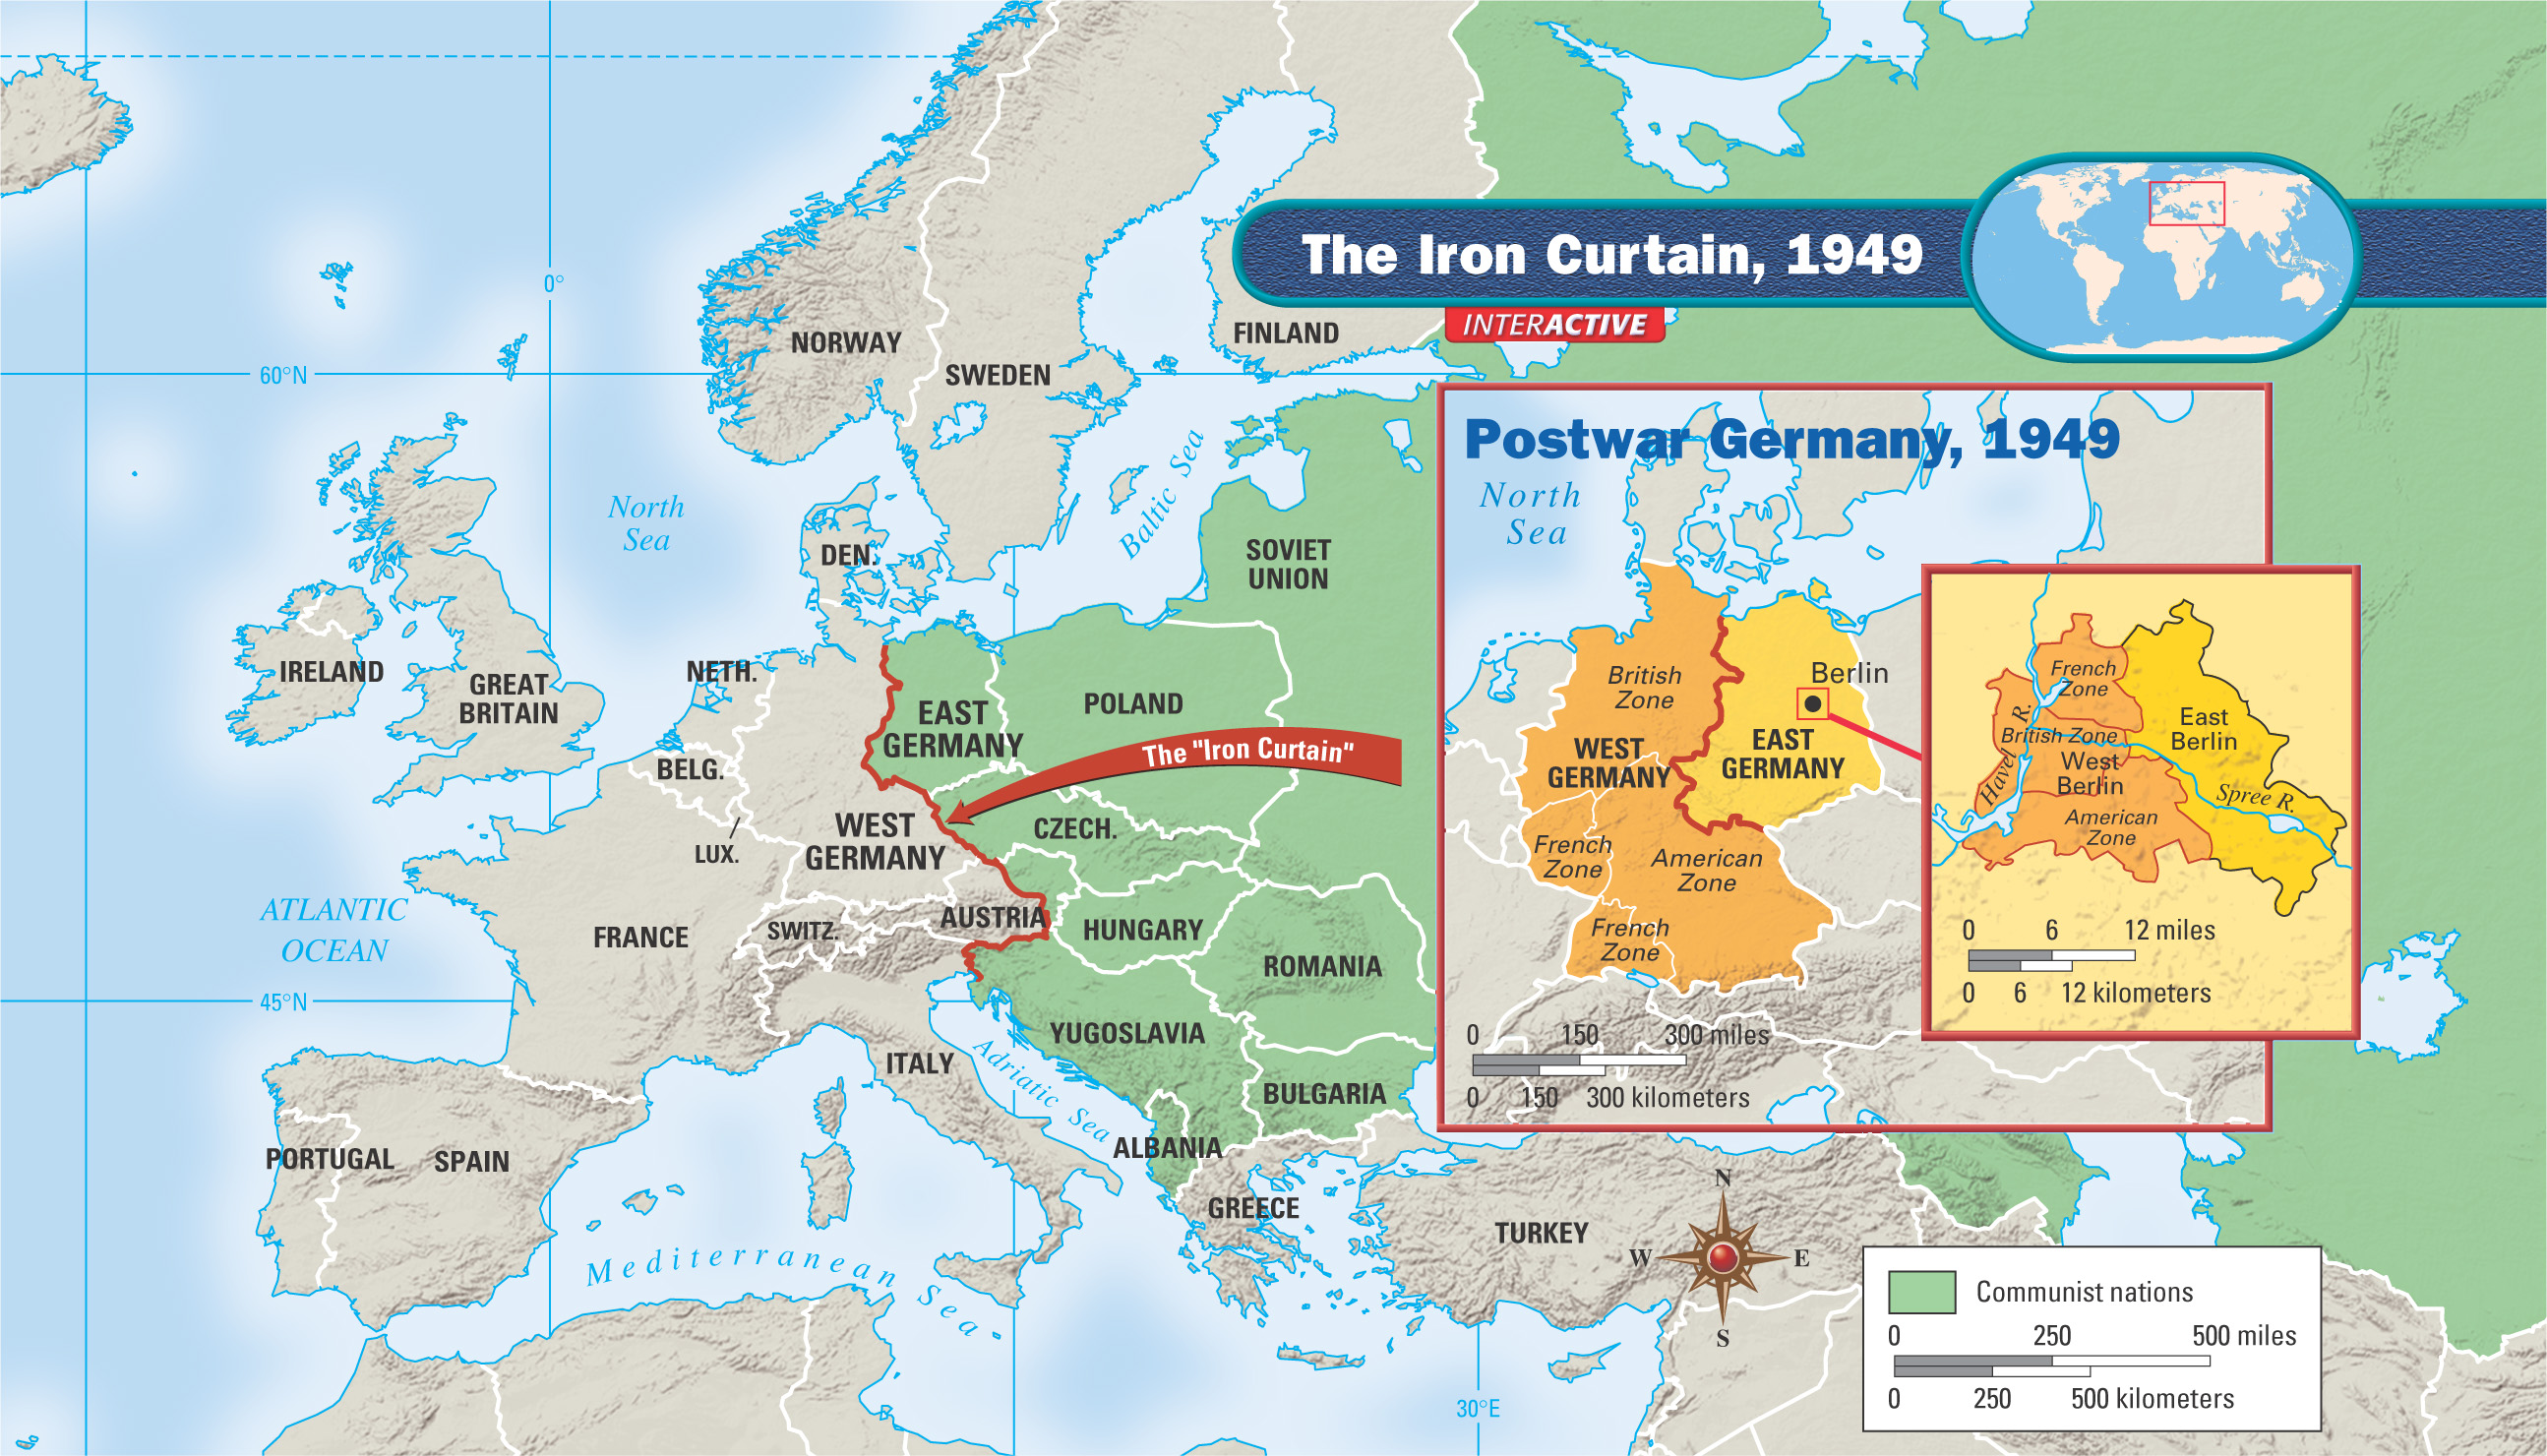 Map: The Iron Curtain 1949 with inset Postwar Germany 1949